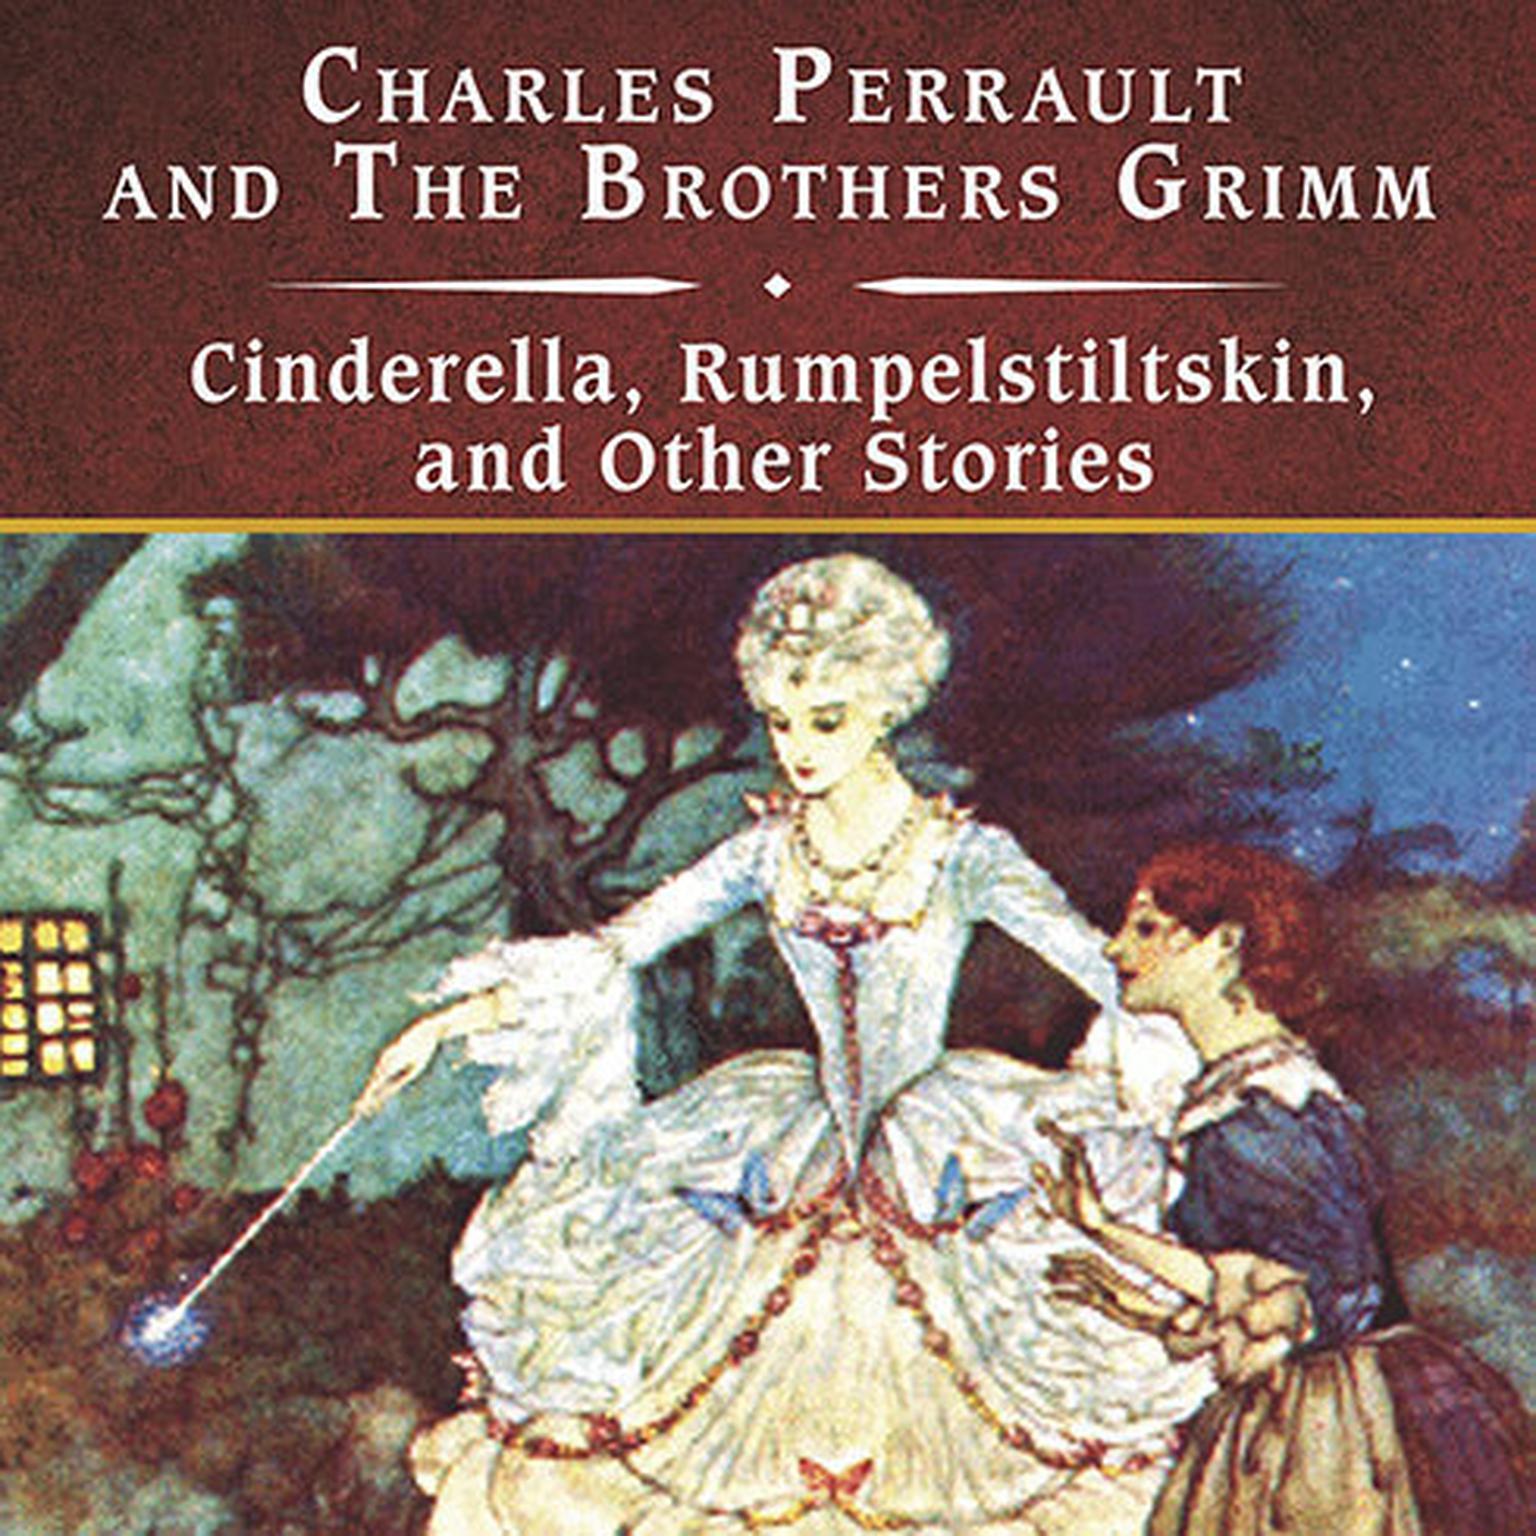 Cinderella, Rumpelstiltskin, and Other Stories, with eBook Audiobook, by various authors